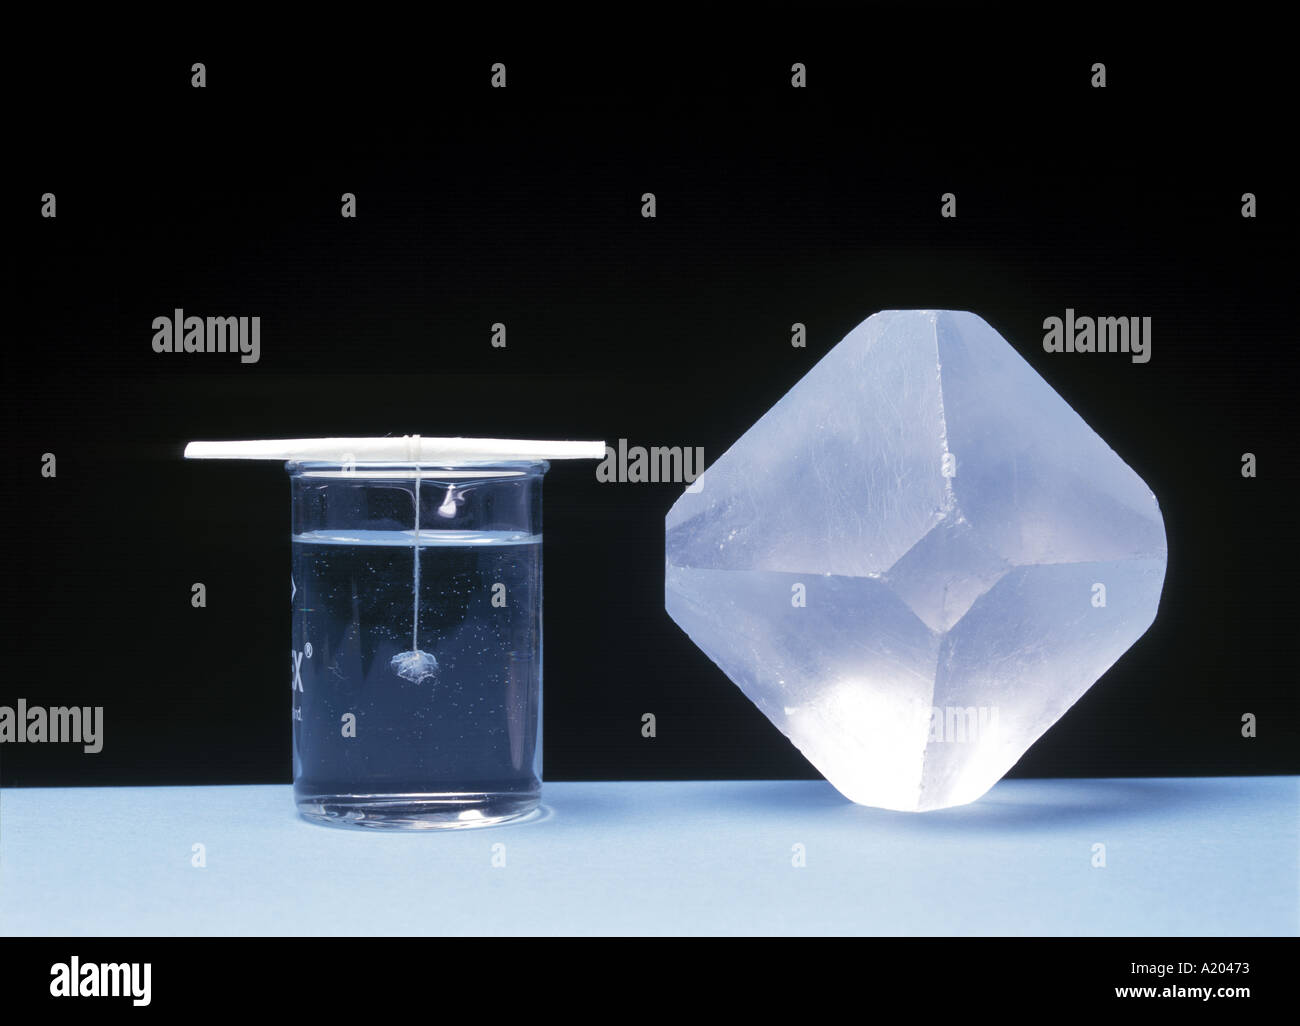 large alum crystal beside a small one growing in beaker Stock Photo